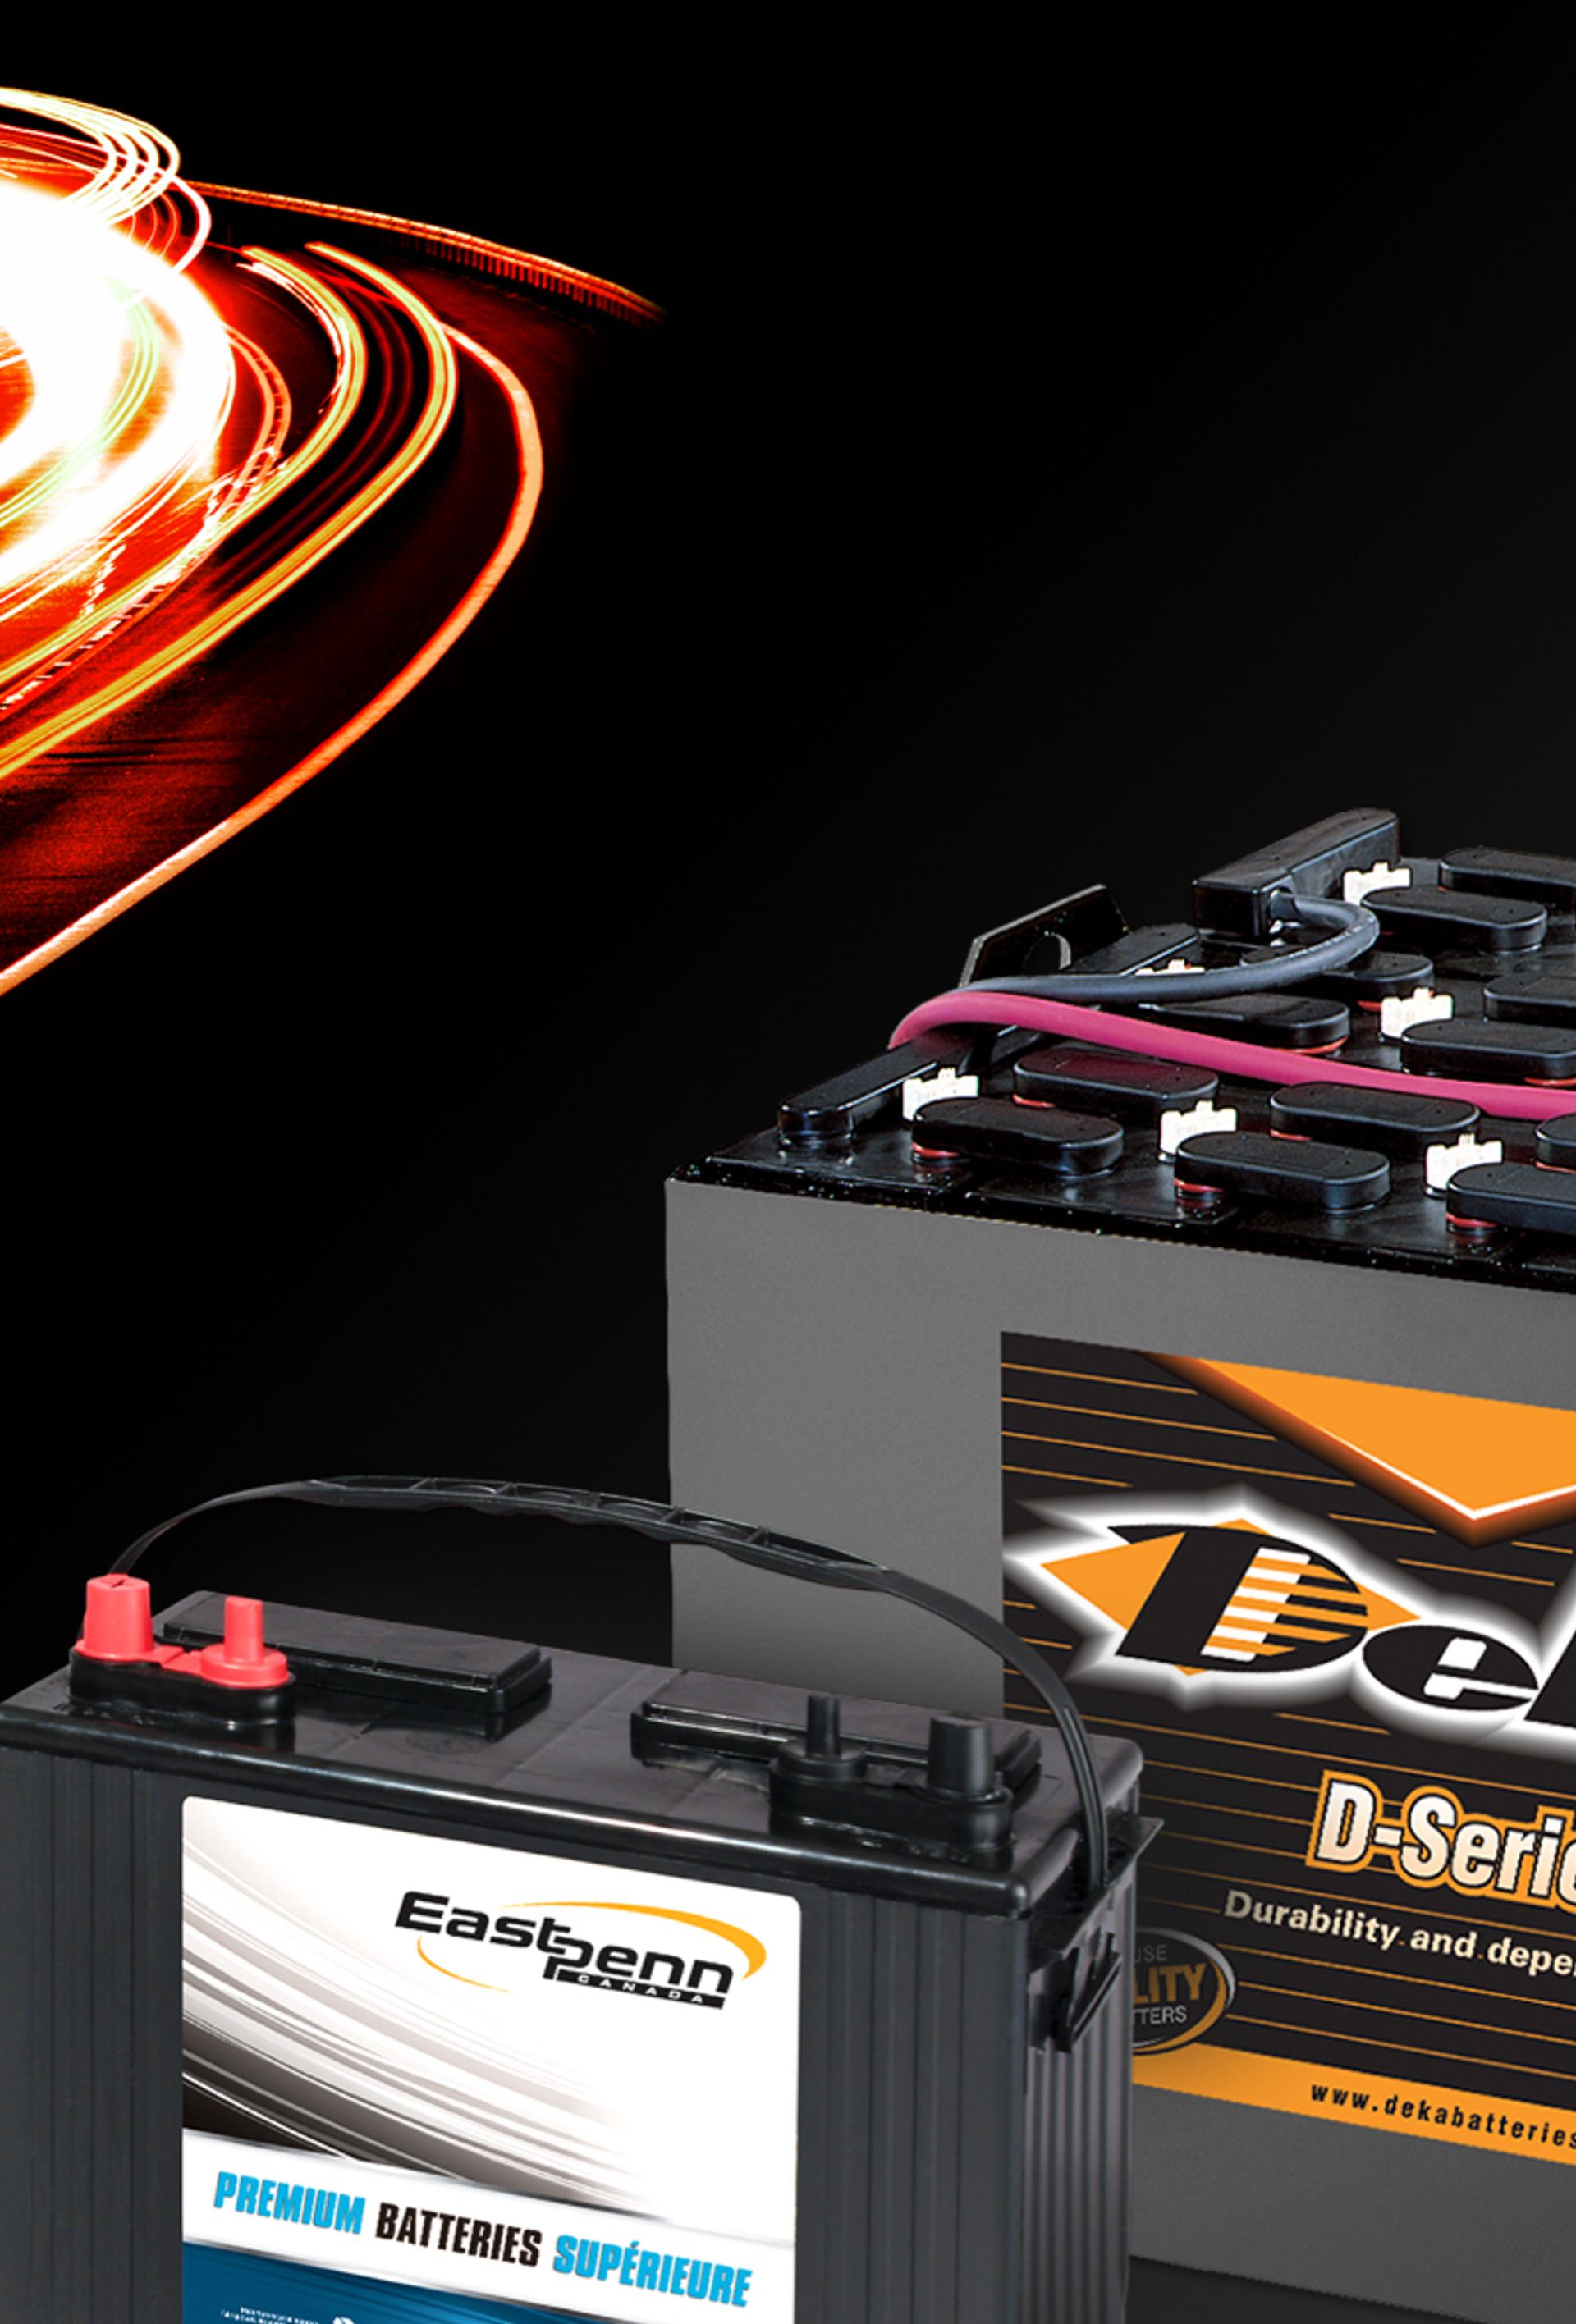 Picture of deka batteries with red light flares in motion on a black background